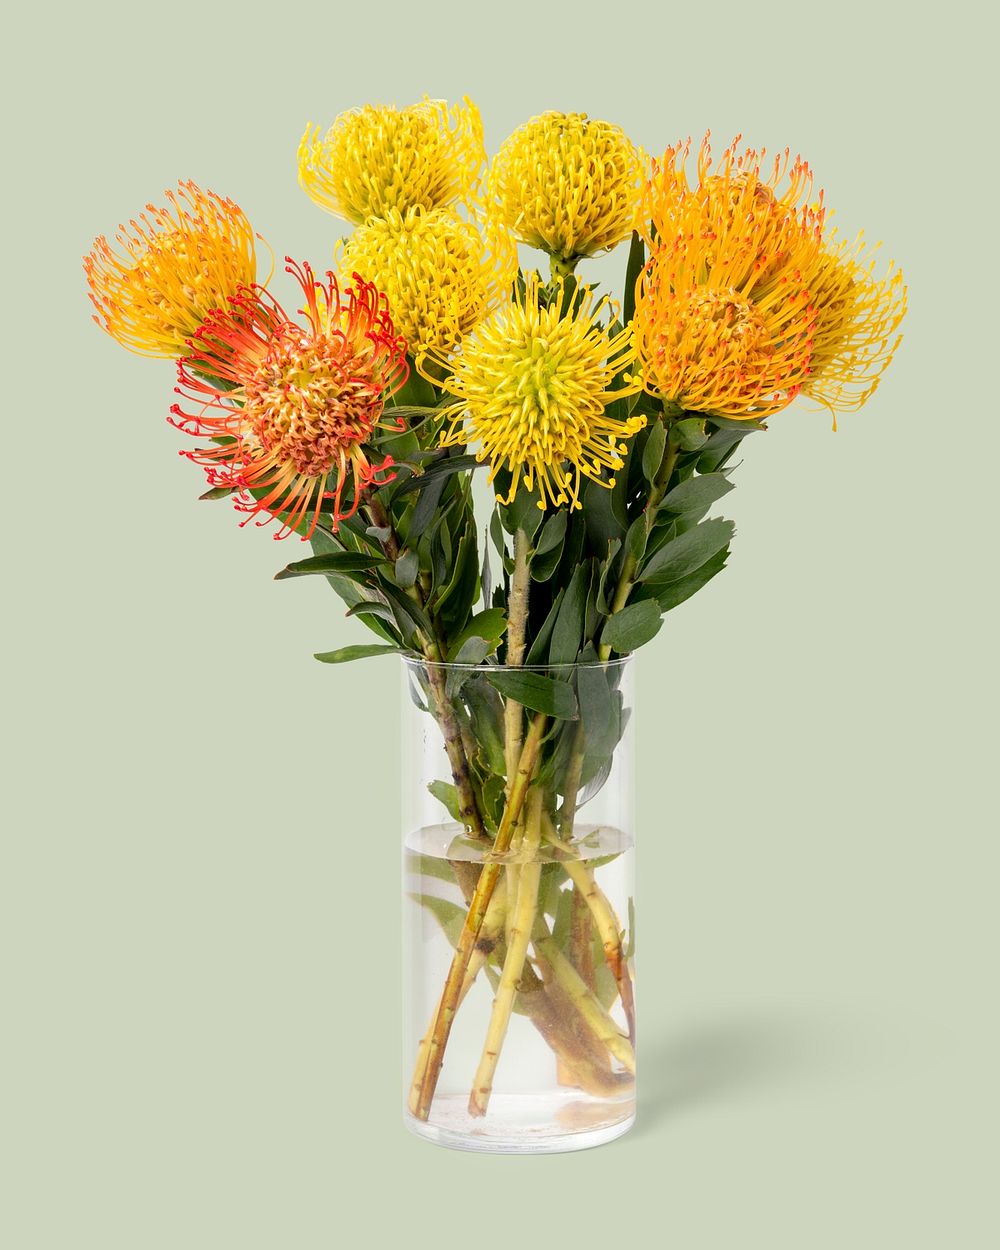 Pincushions in glass vase, collage element psd